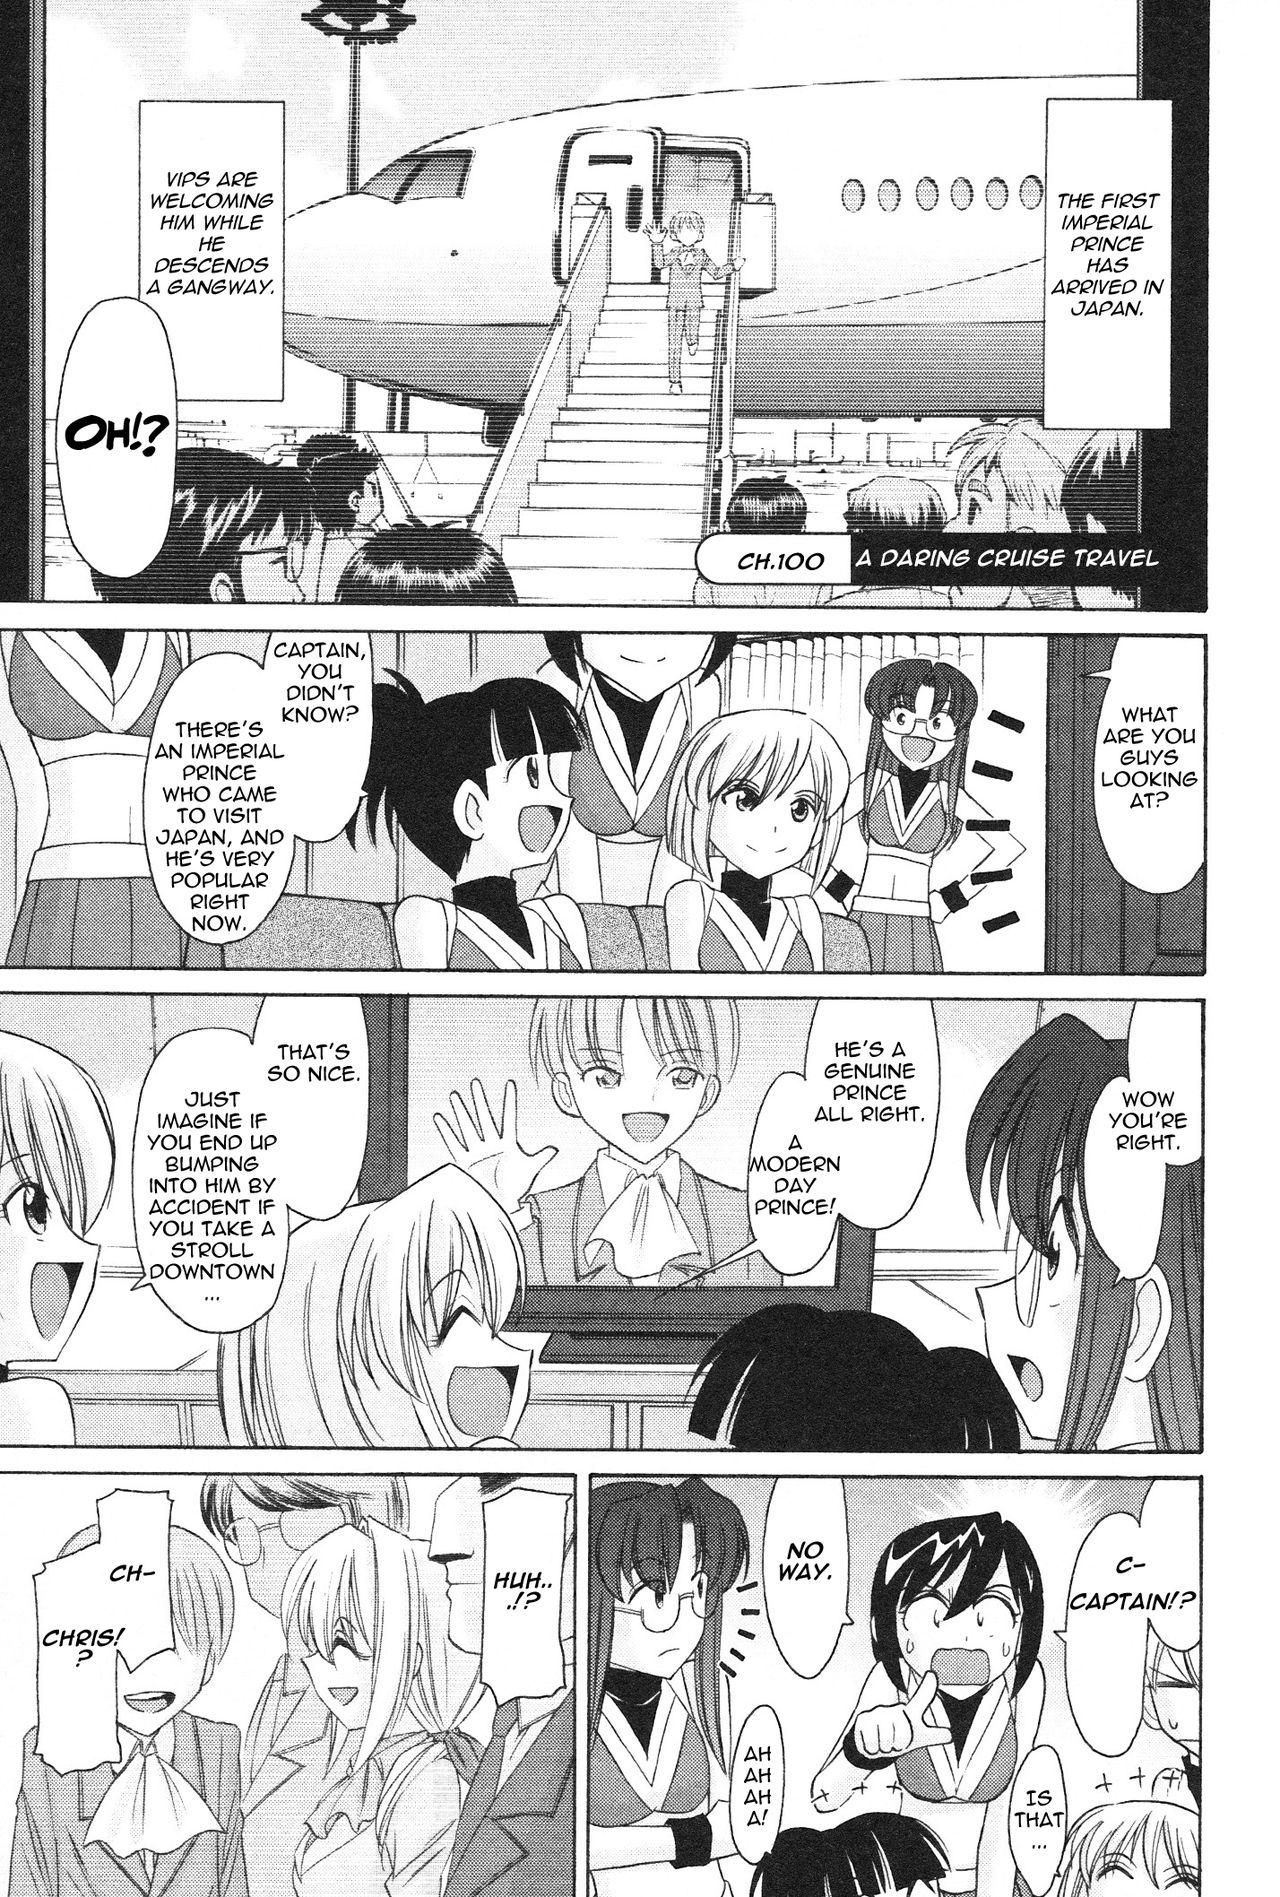 Best Blowjob Cheers! 12 Ch.100 Perfect - Page 2